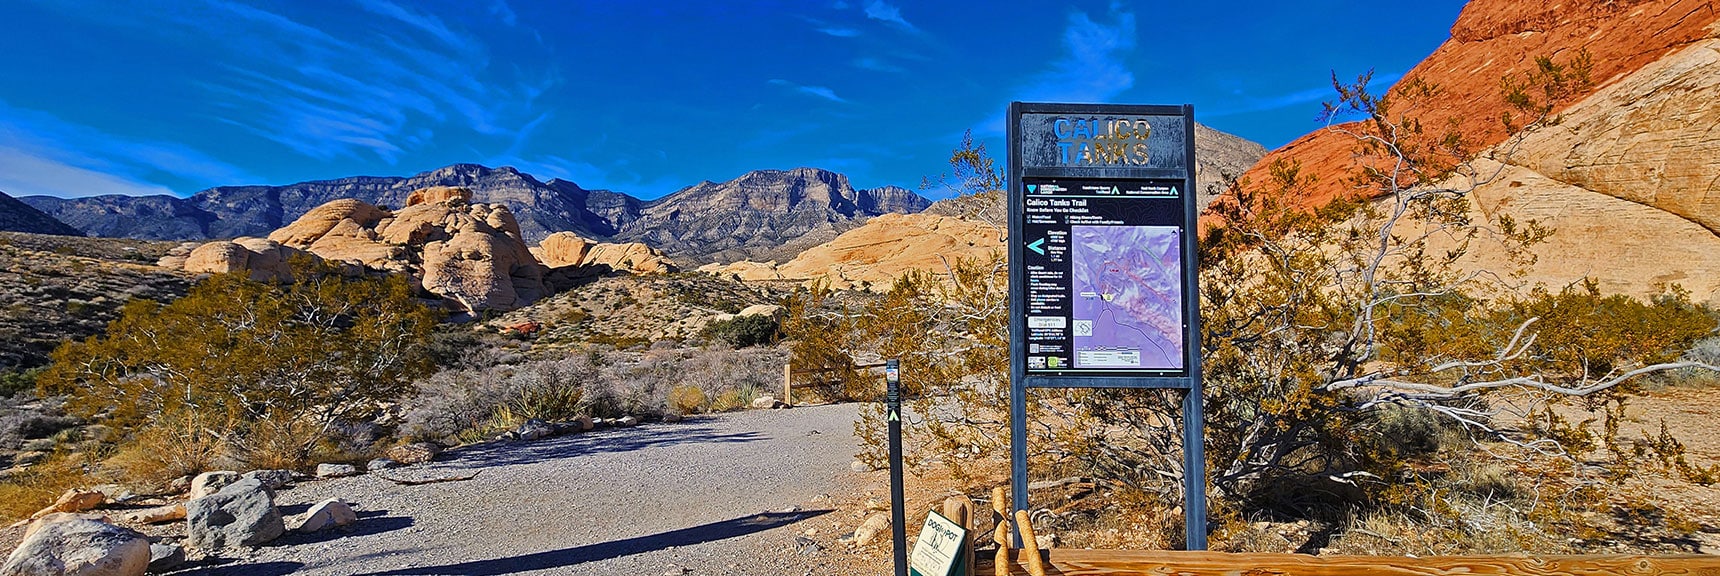 Calico Tanks Trail Sign at the Sandstone Quarry Parking Area | Upper Calico Hills Loop | Calico Basin and Red Rock Canyon, Nevada